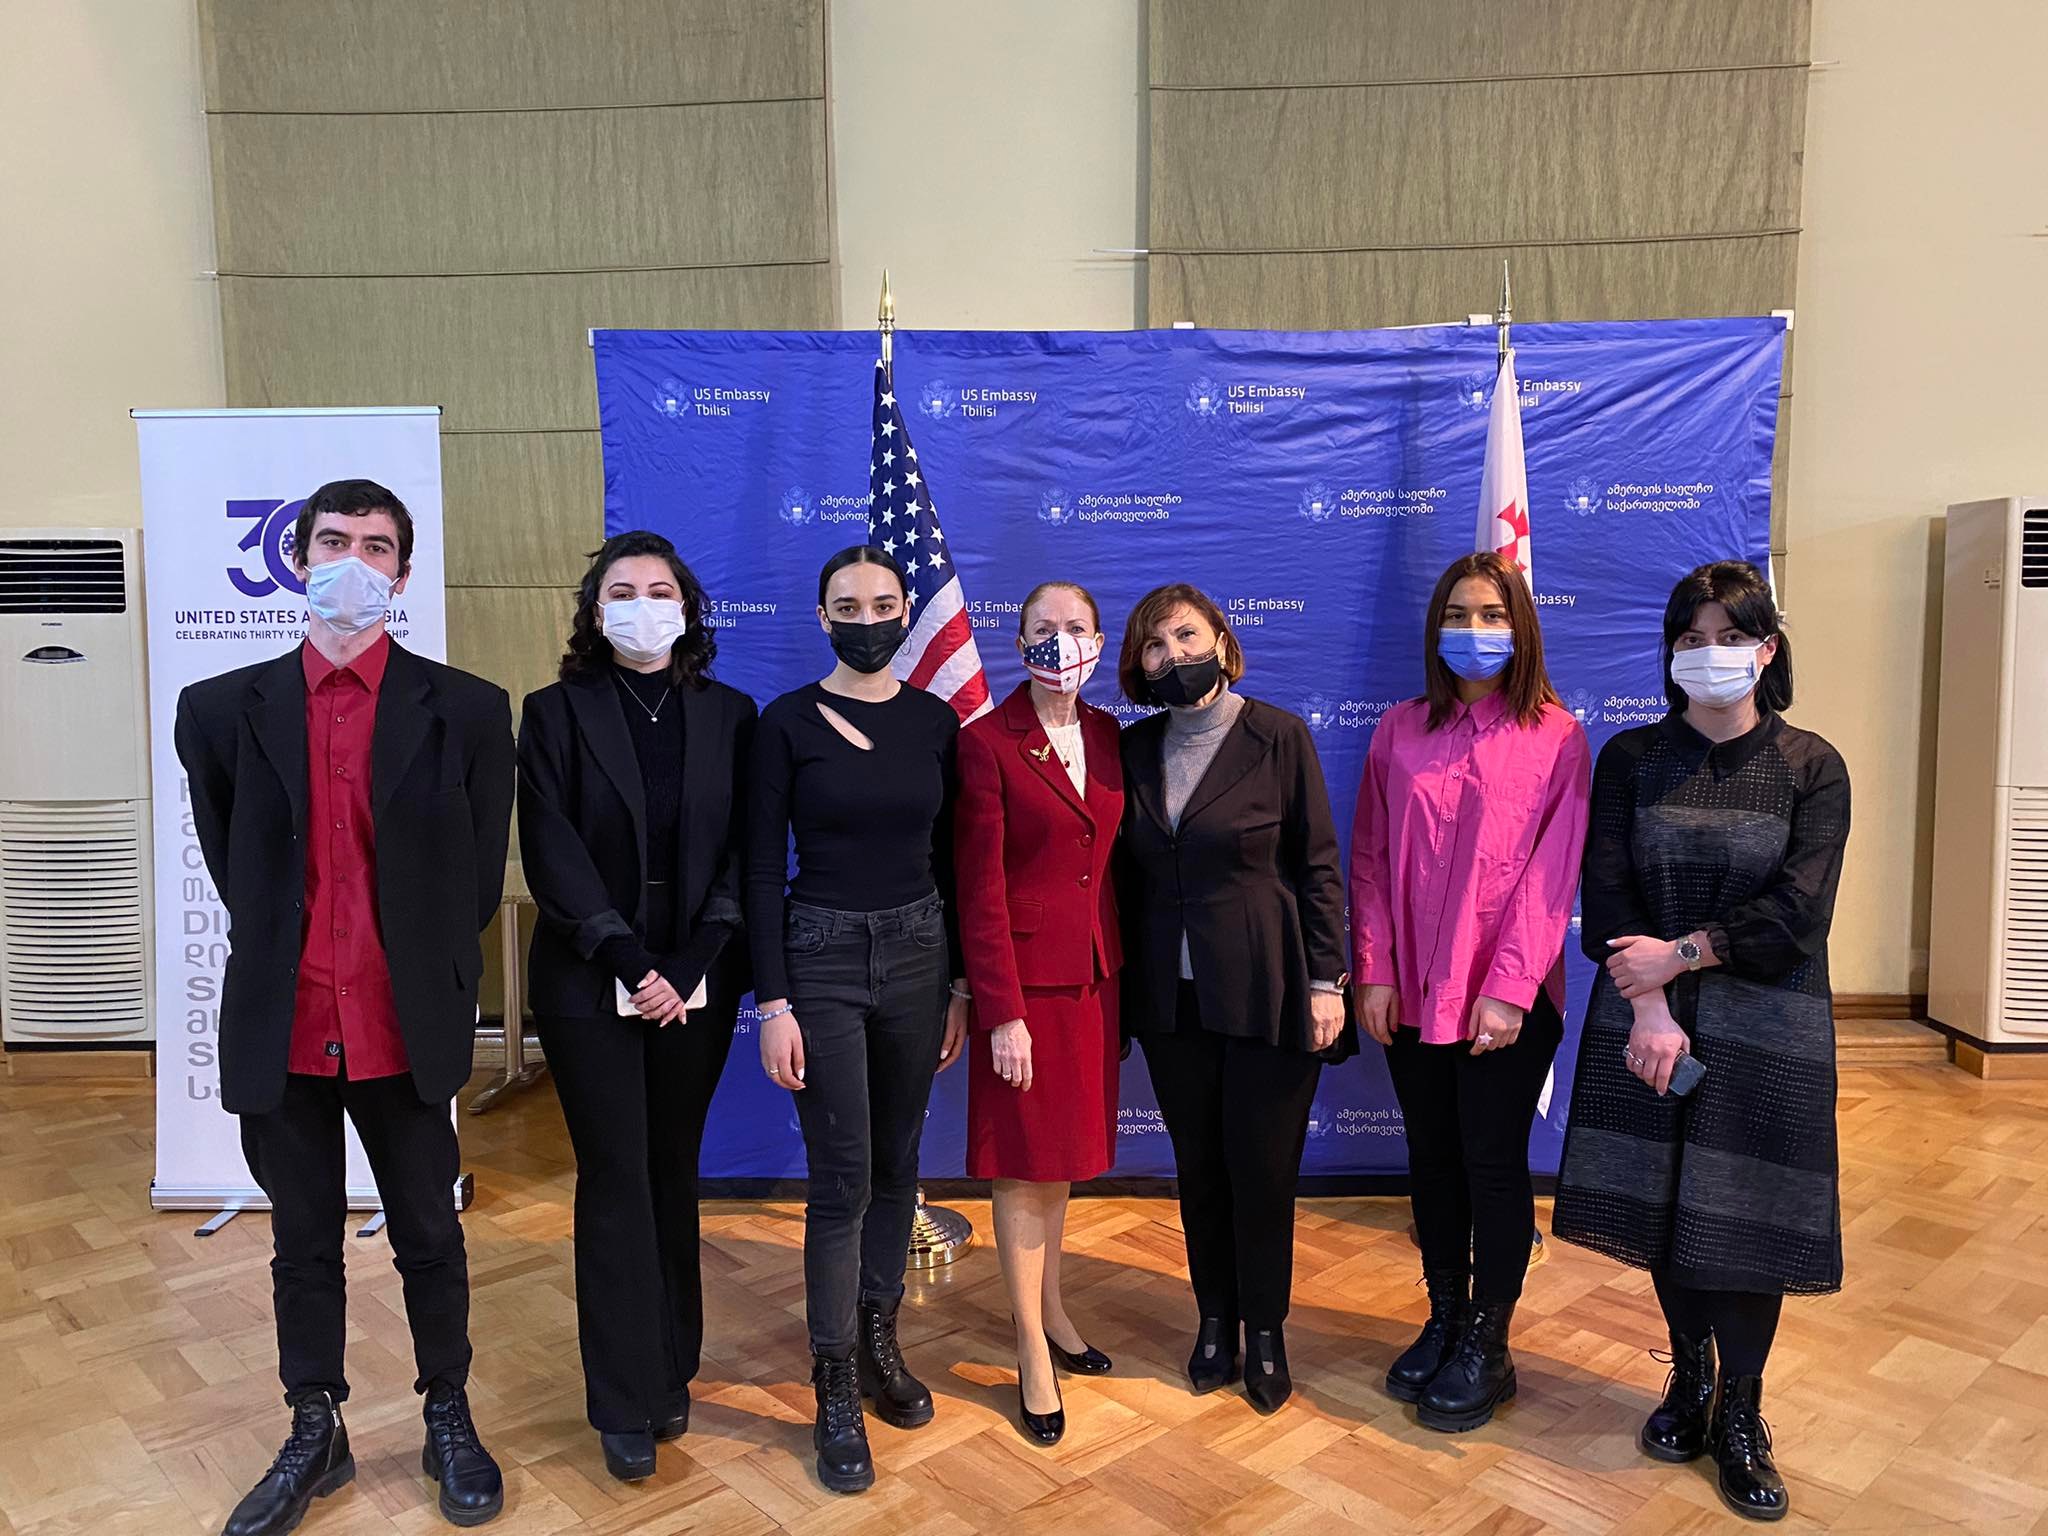 IBSU's students participated in an event organized by the US Embassy